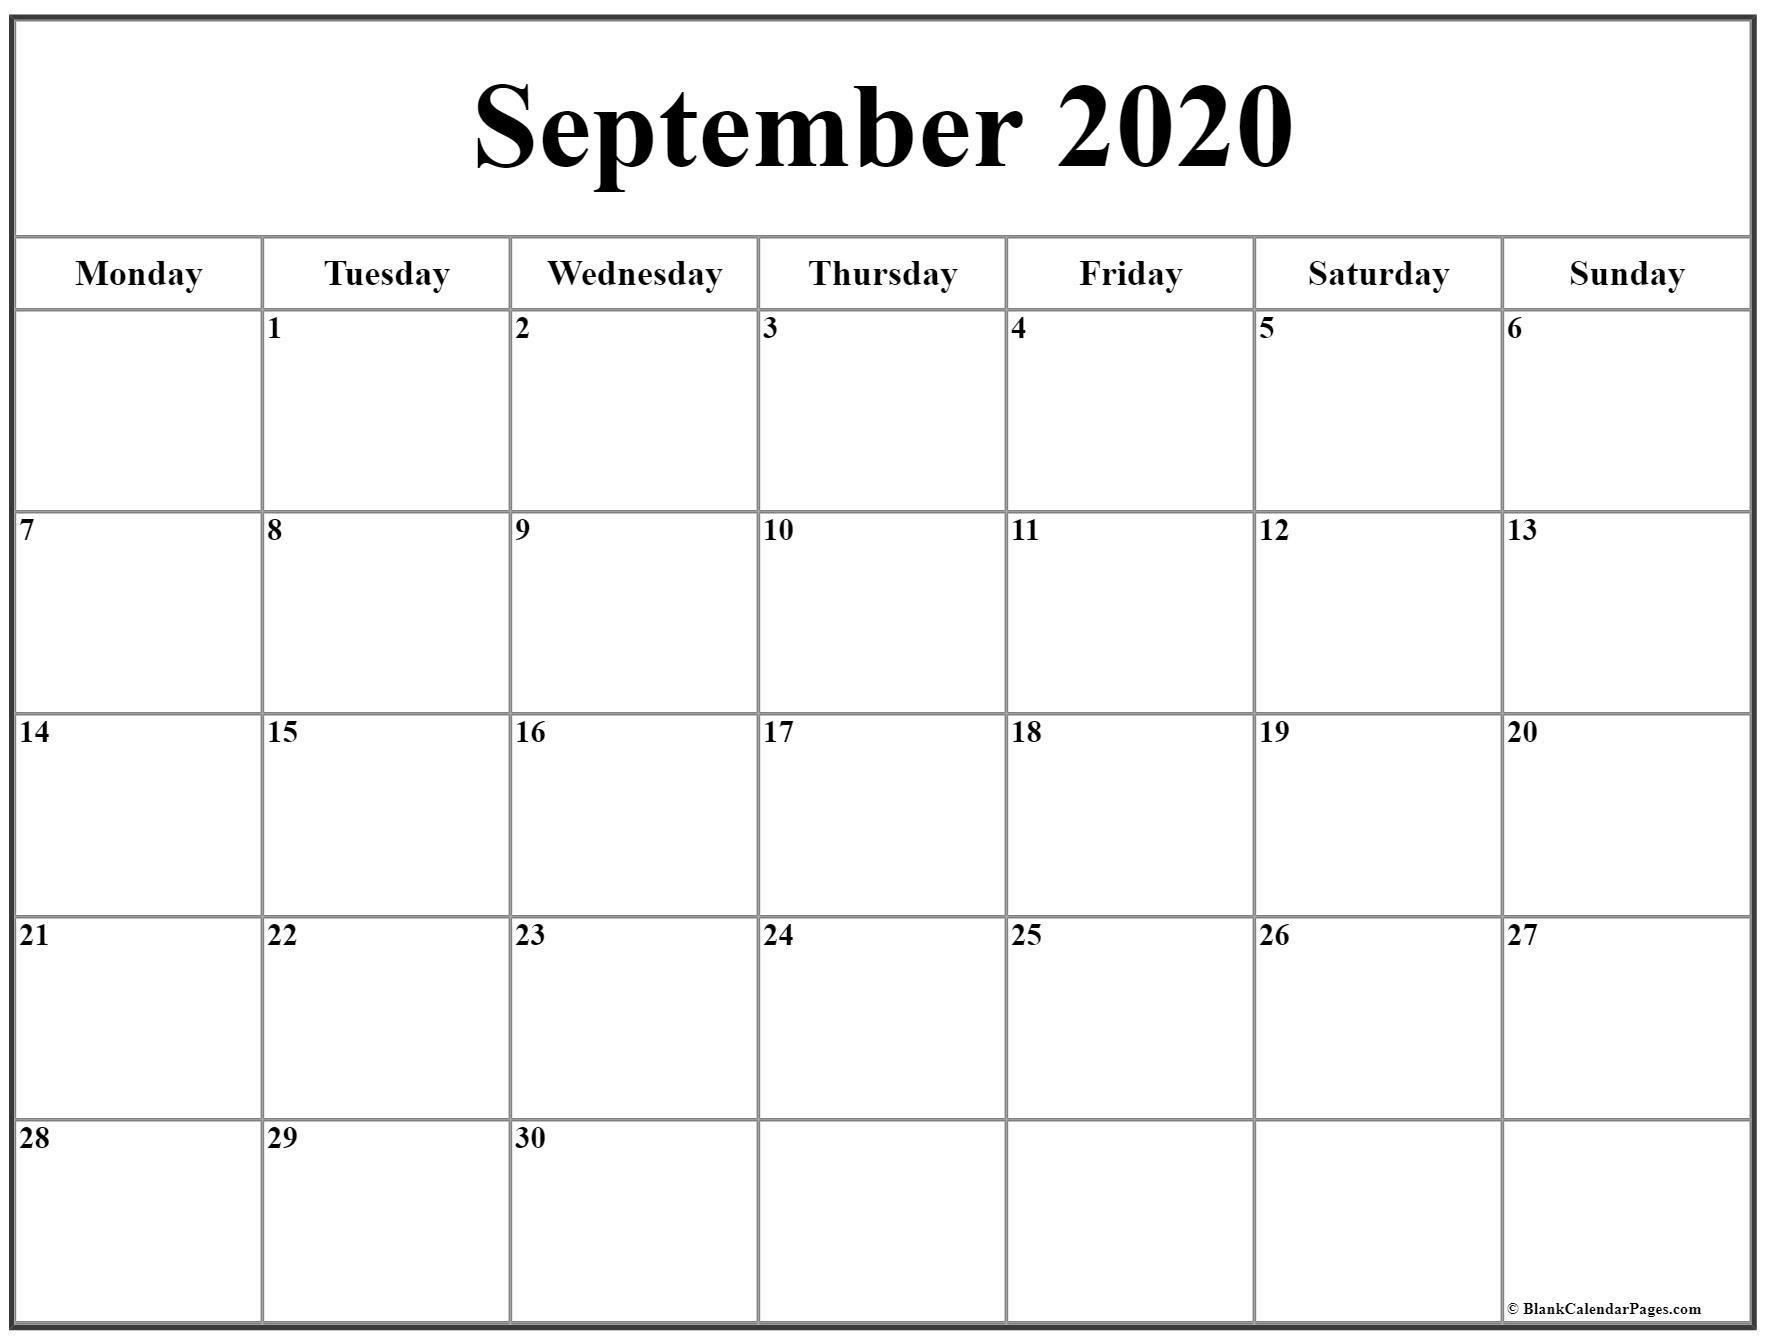 September 2020 Monday Calendar | Monday To Sunday in Monthly Calendars That Start With Monday